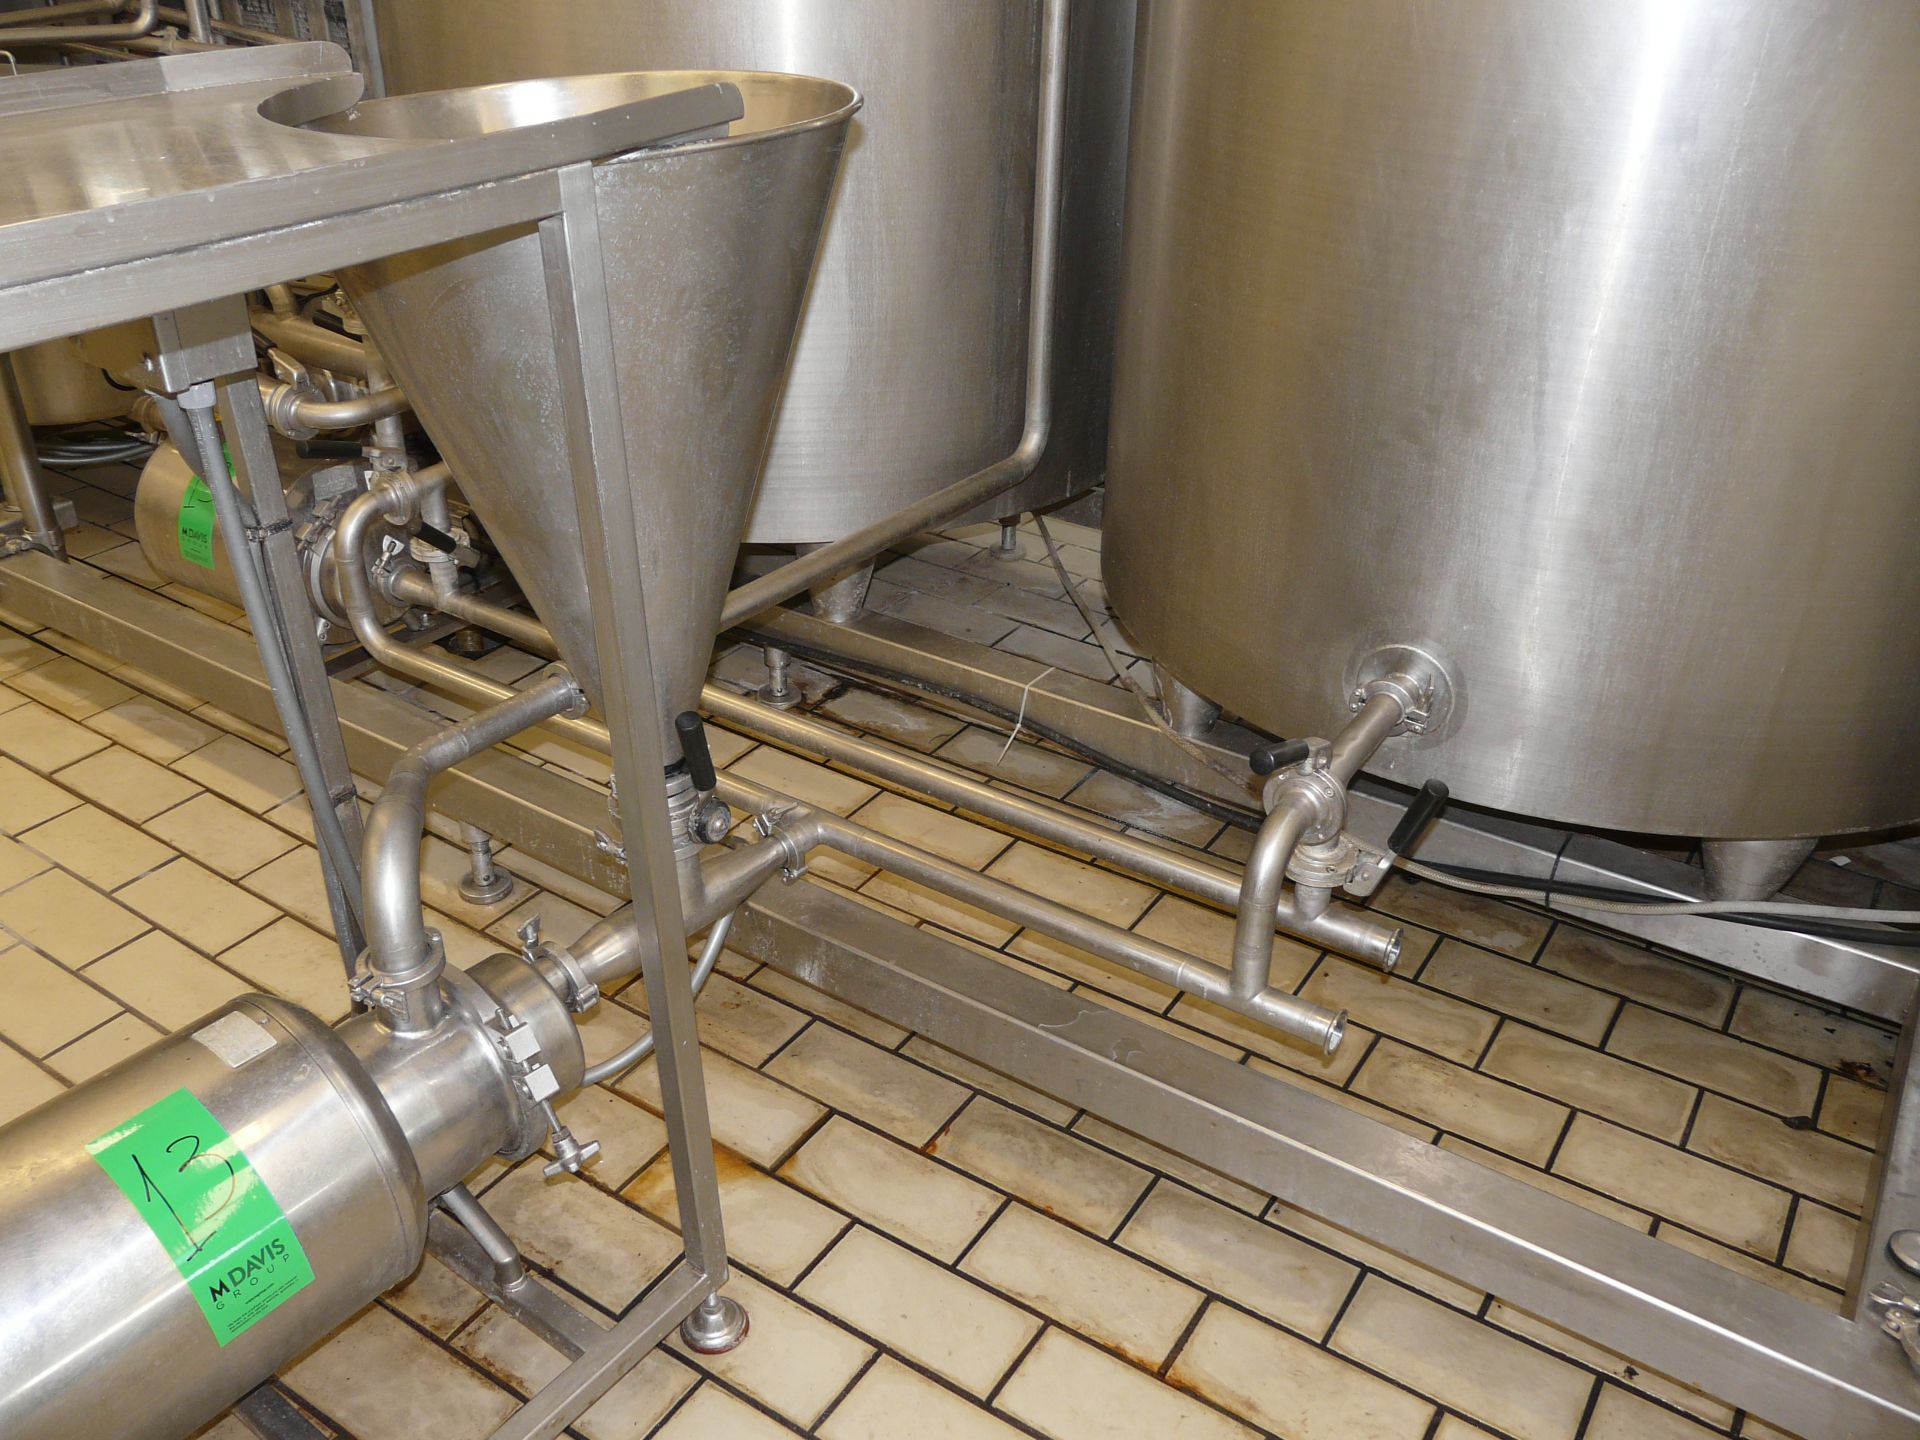 English: TETRA PAK HOYER HTST SYSTEM, 1200 Pasteurizer for Ice Cream, Contains 2 x Tanks with - Image 43 of 45